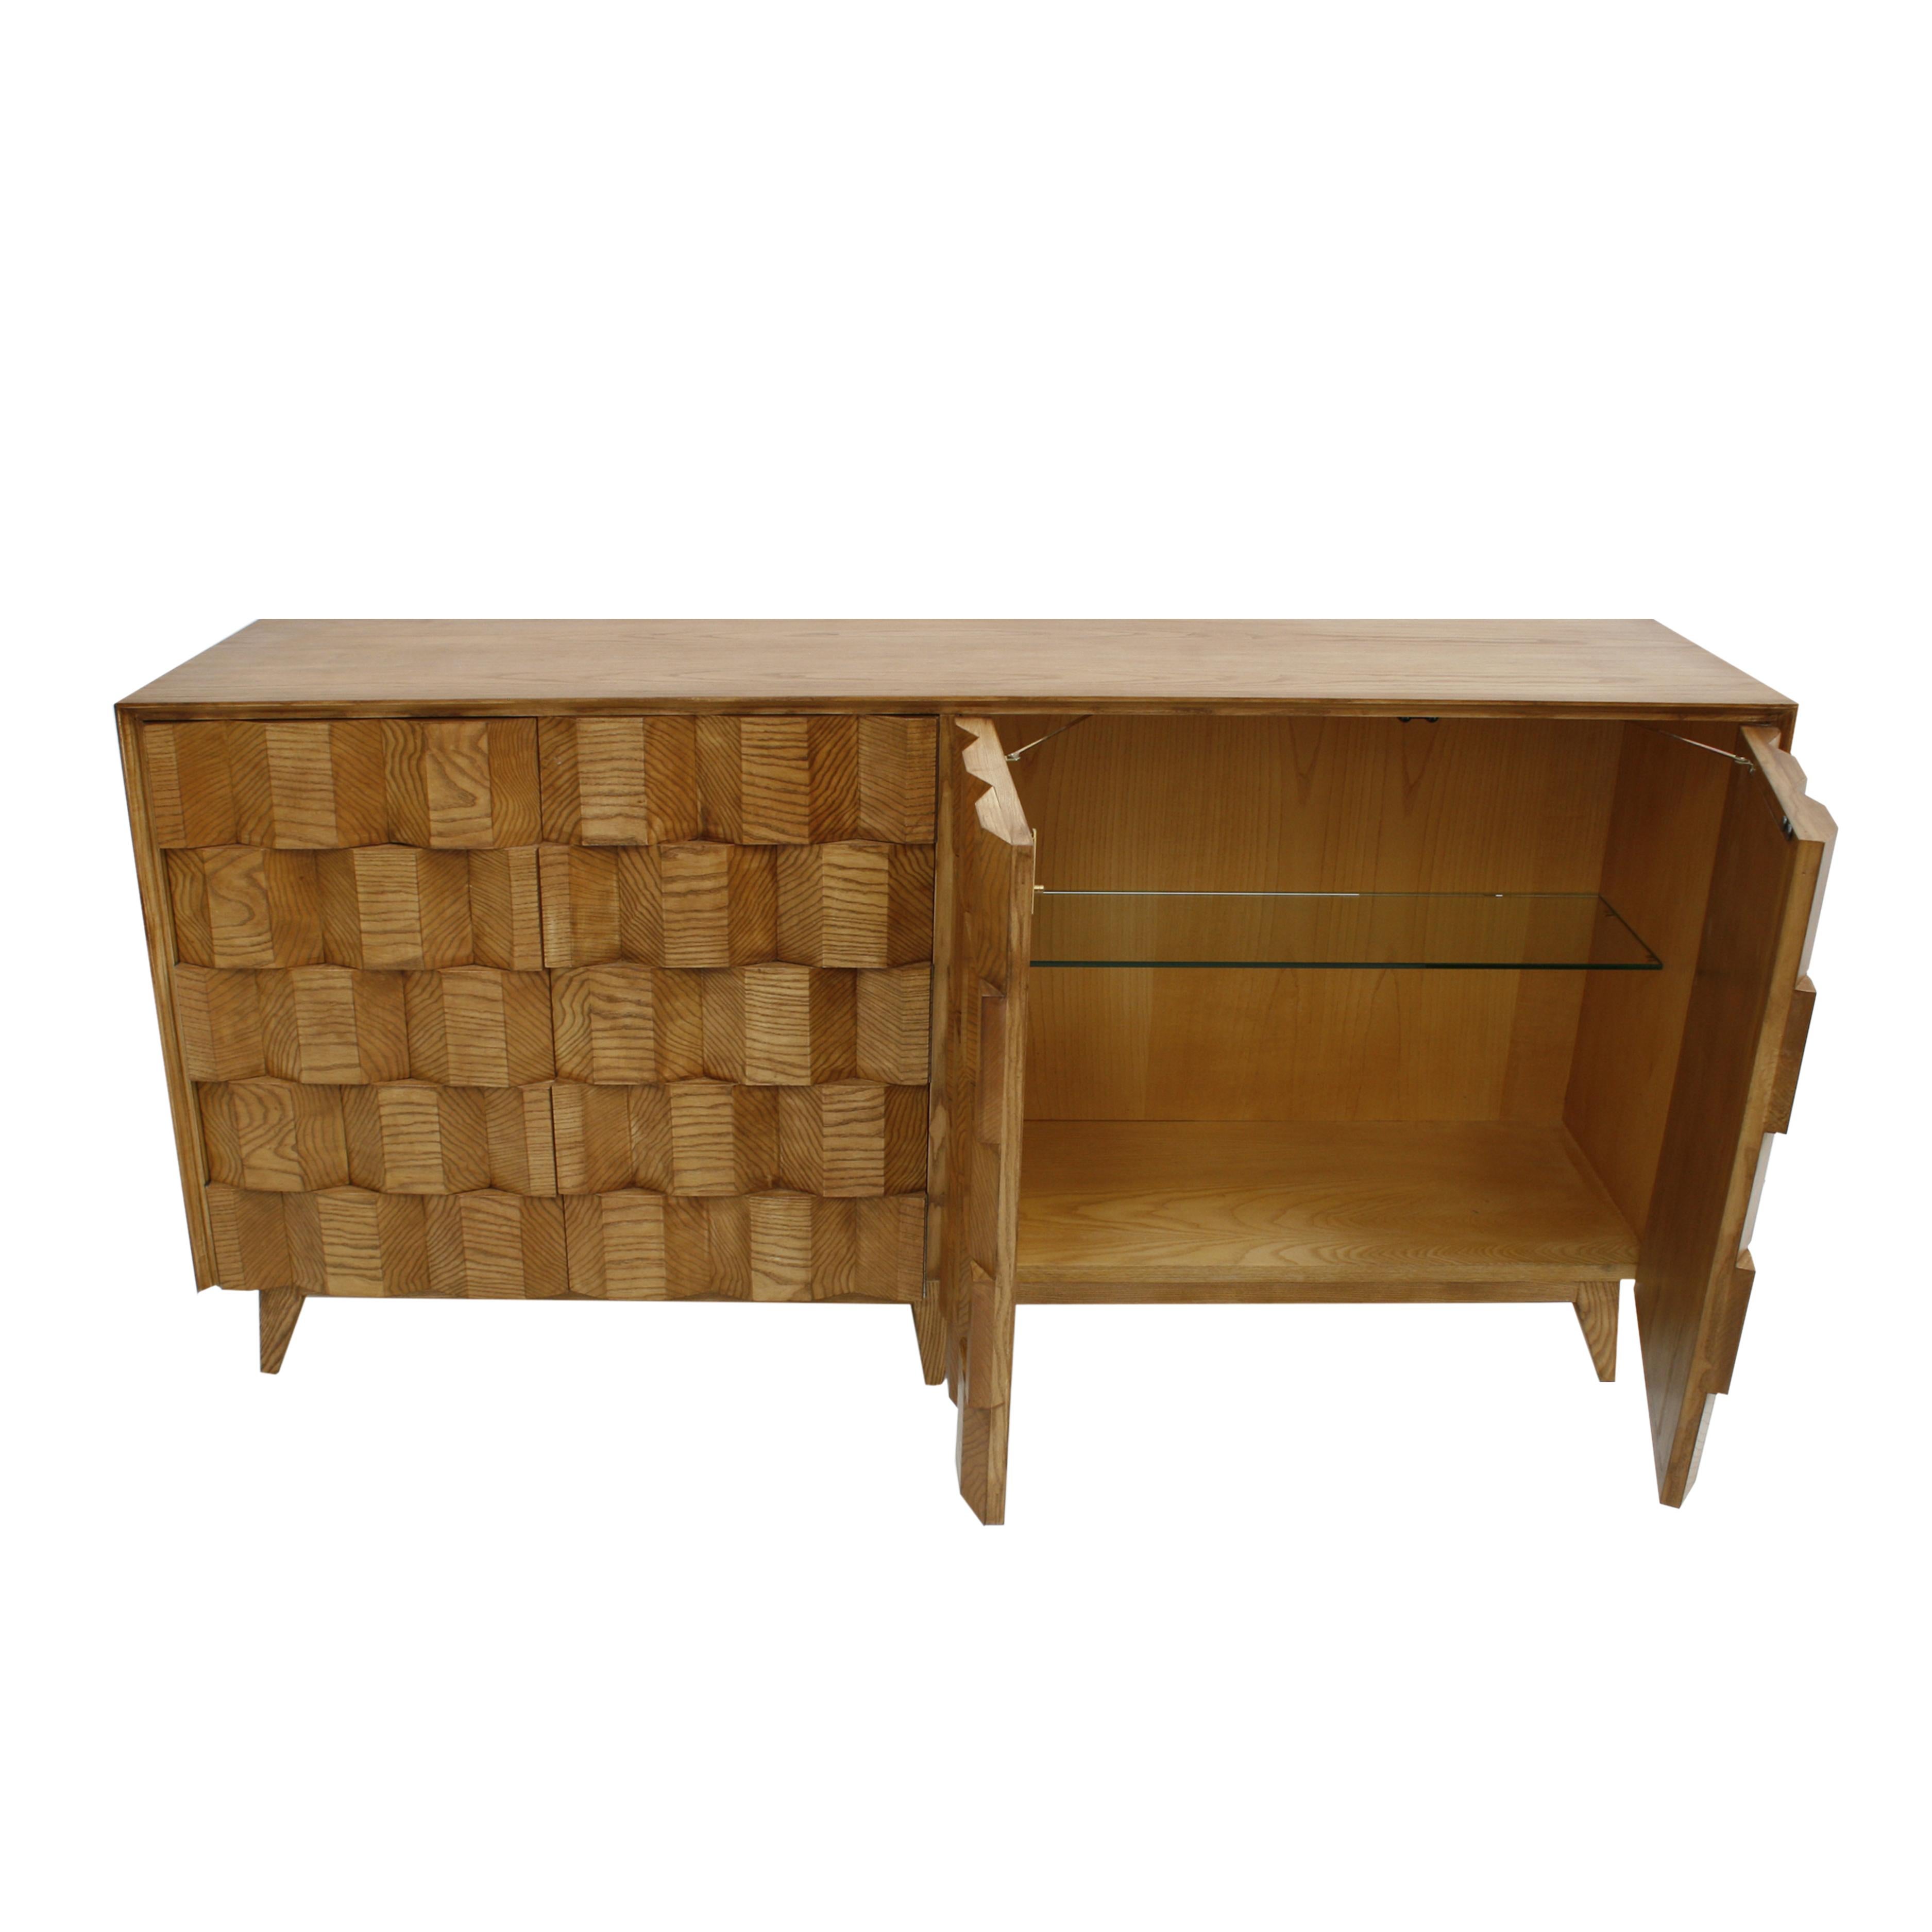 Mid-Century Modern Style Oakwood Italian Sideboard Designed by L. A. Studio In Good Condition For Sale In Ibiza, Spain